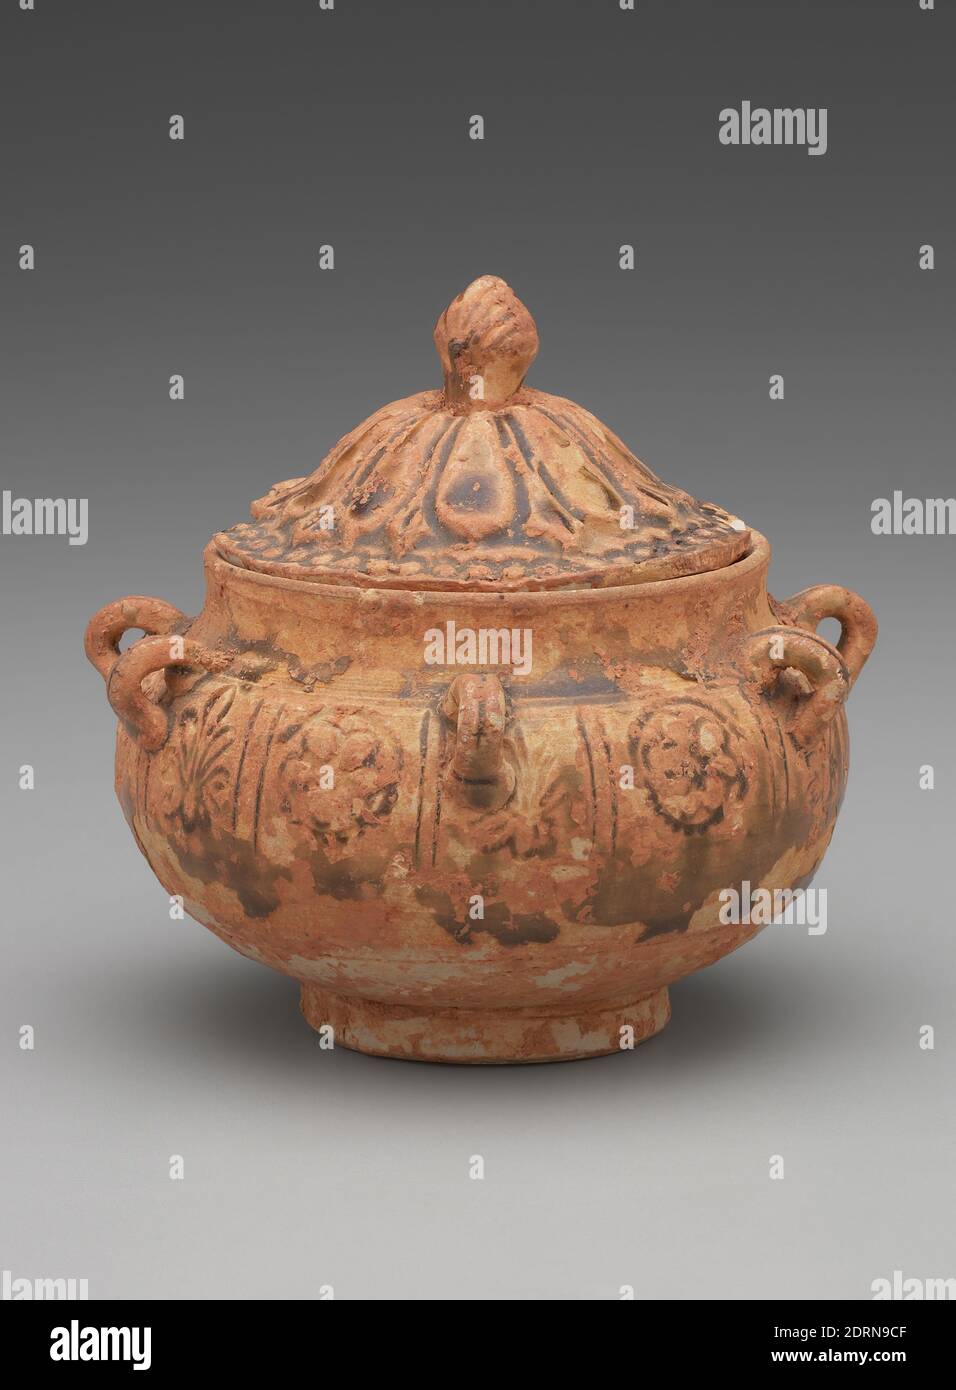 Jar with Flowers and Palmettes, late 6th–early 7th century, Stoneware with moulded with incised decoration under glaze (Hunan Xiangyin ware), 4 1/4 × 4 1/2 in. (10.8 × 11.4 cm), China, Chinese, Sui dynasty (581–618 C.E.), Containers - Ceramics Stock Photo